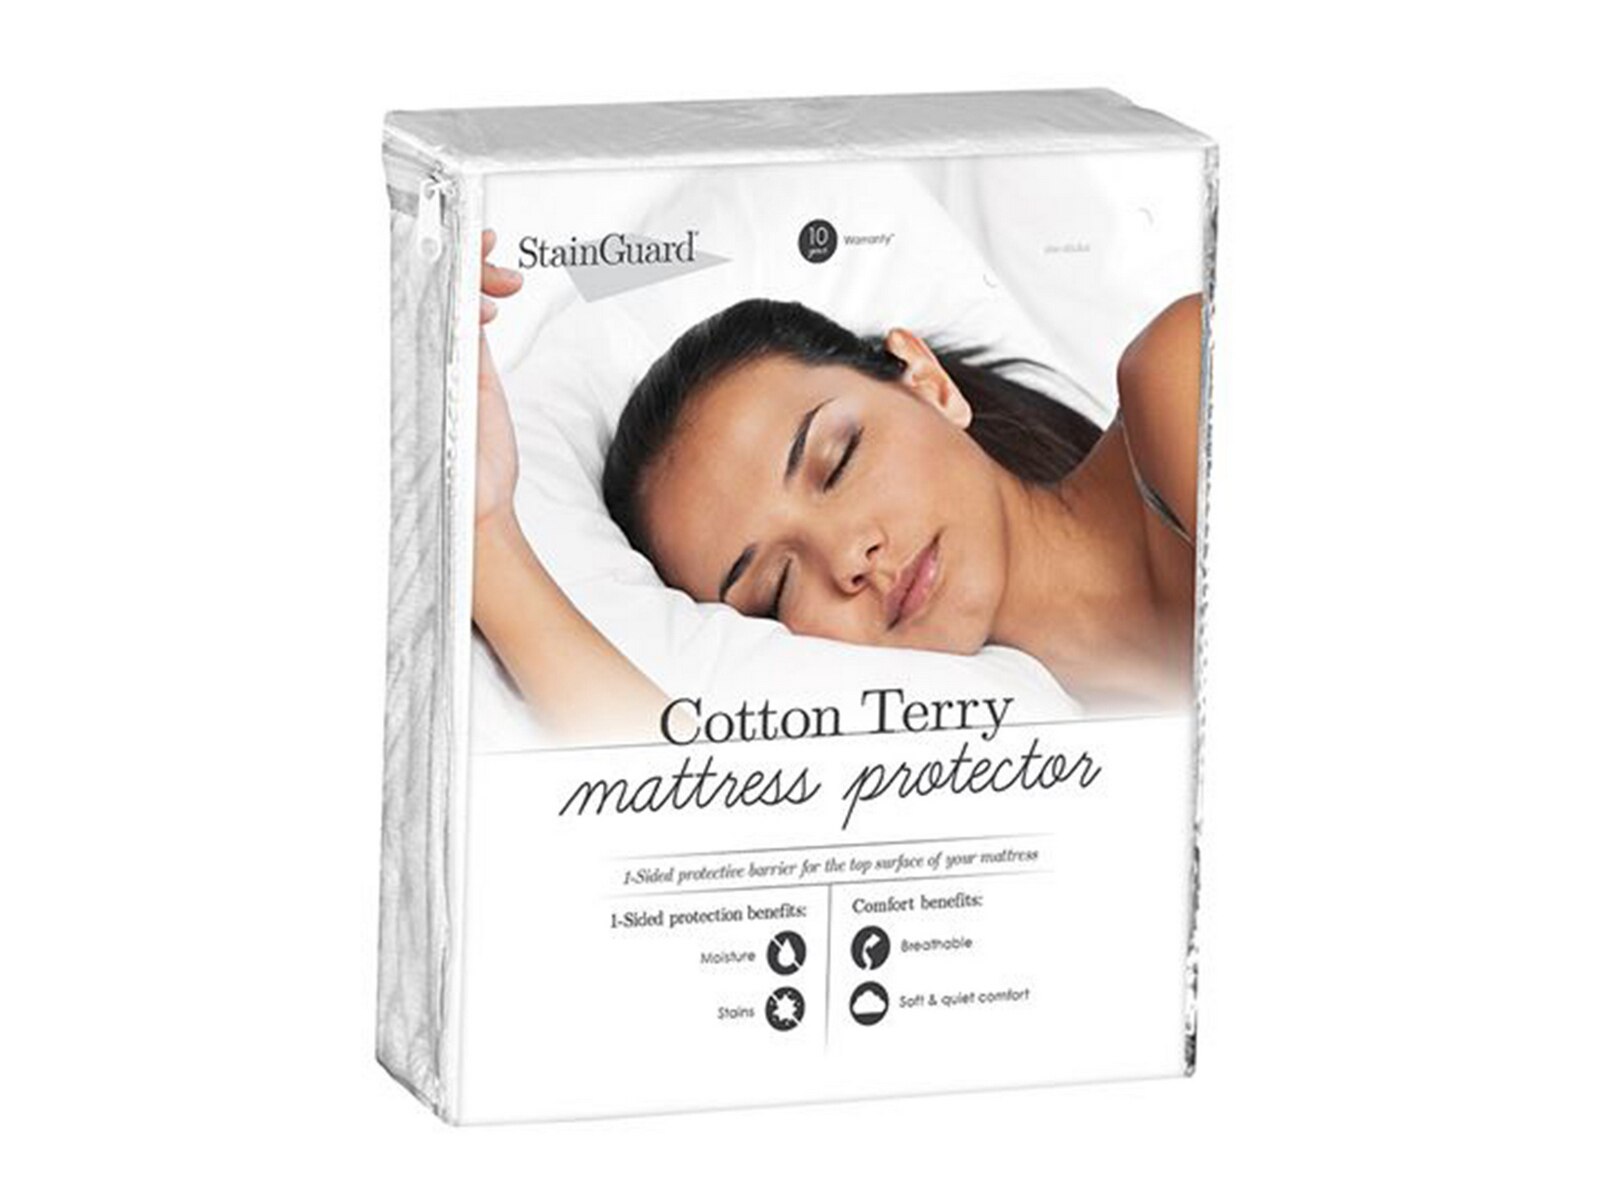 purecare stainguard cotton terry blend waterproof mattress protector